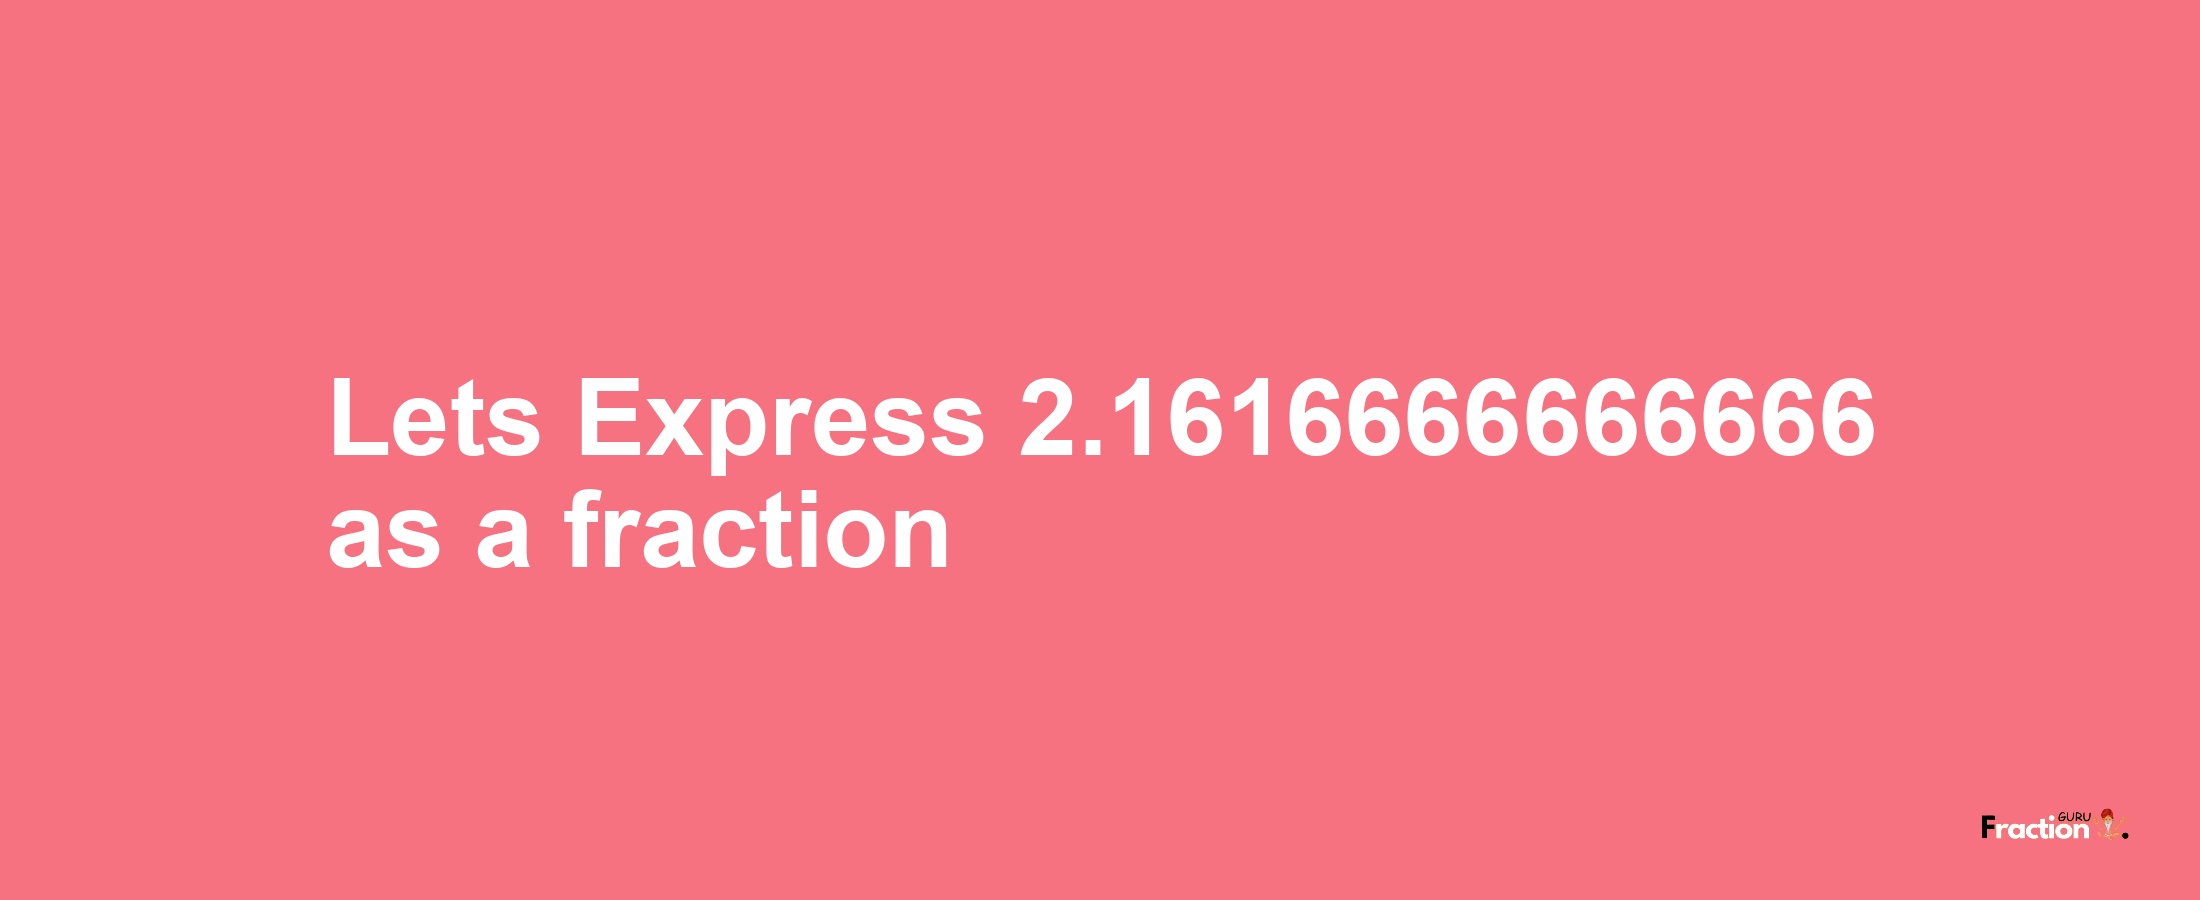 Lets Express 2.1616666666666 as afraction